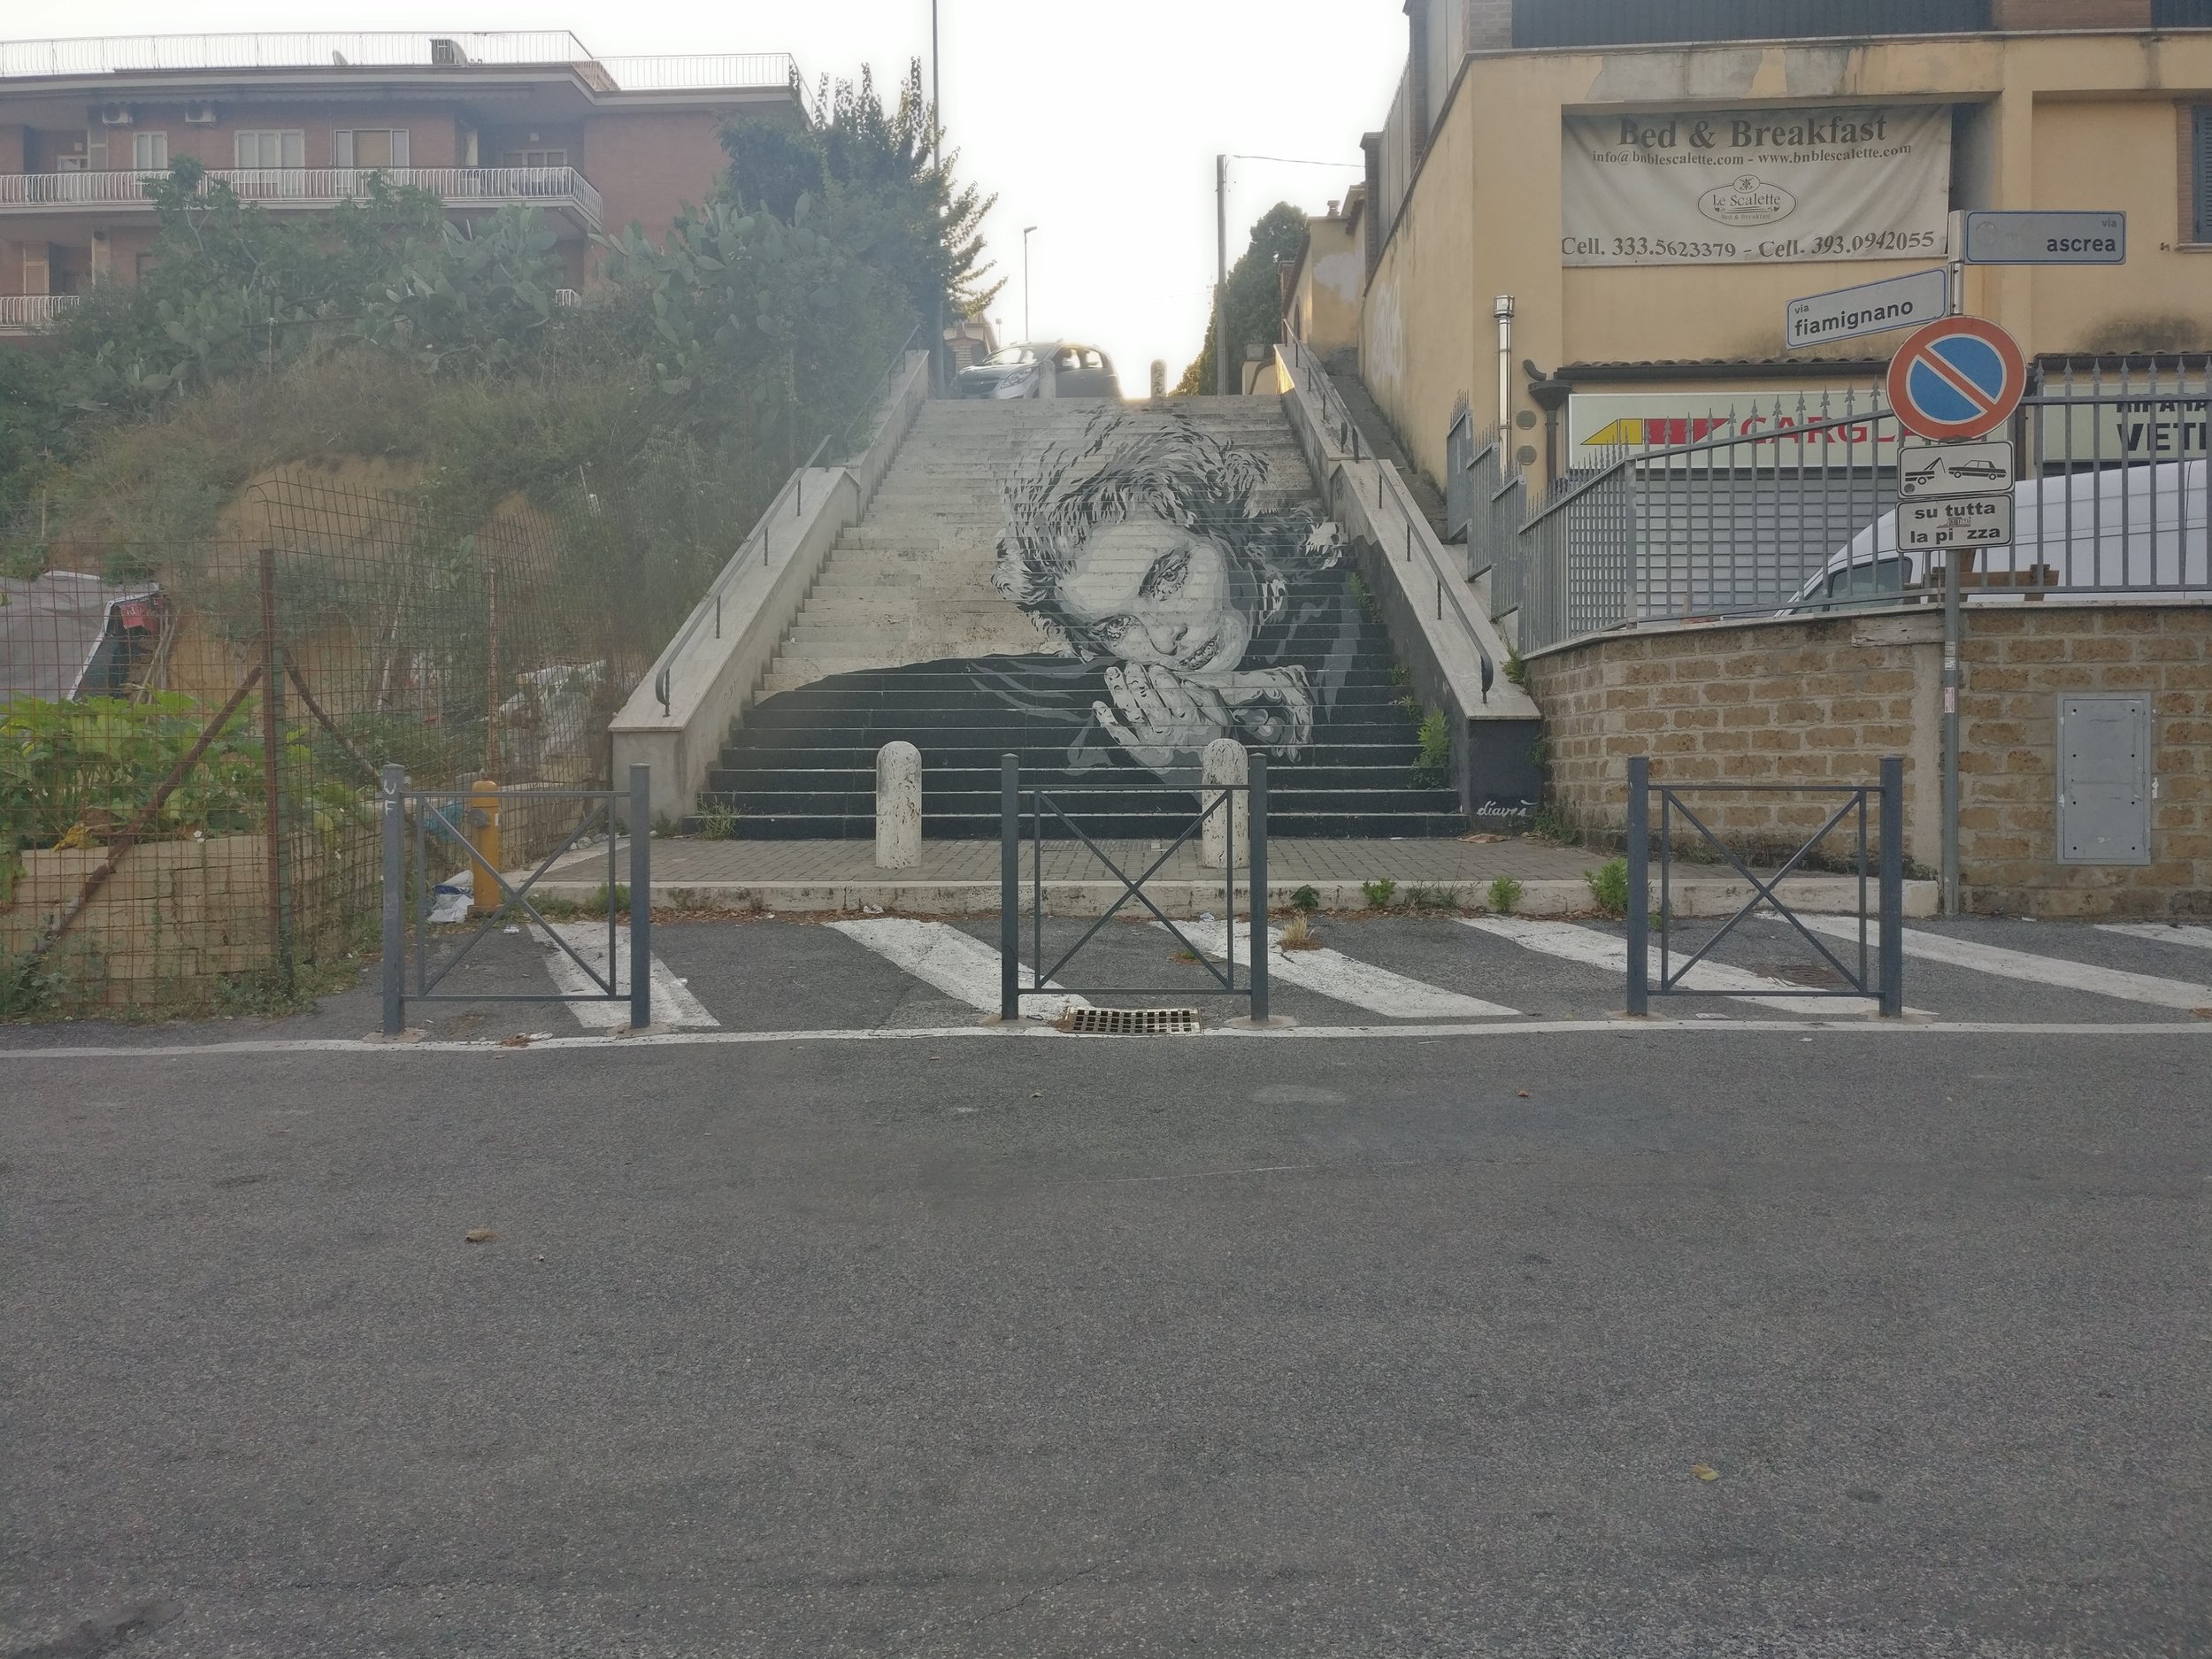  Mural on stairs approaching Rome 